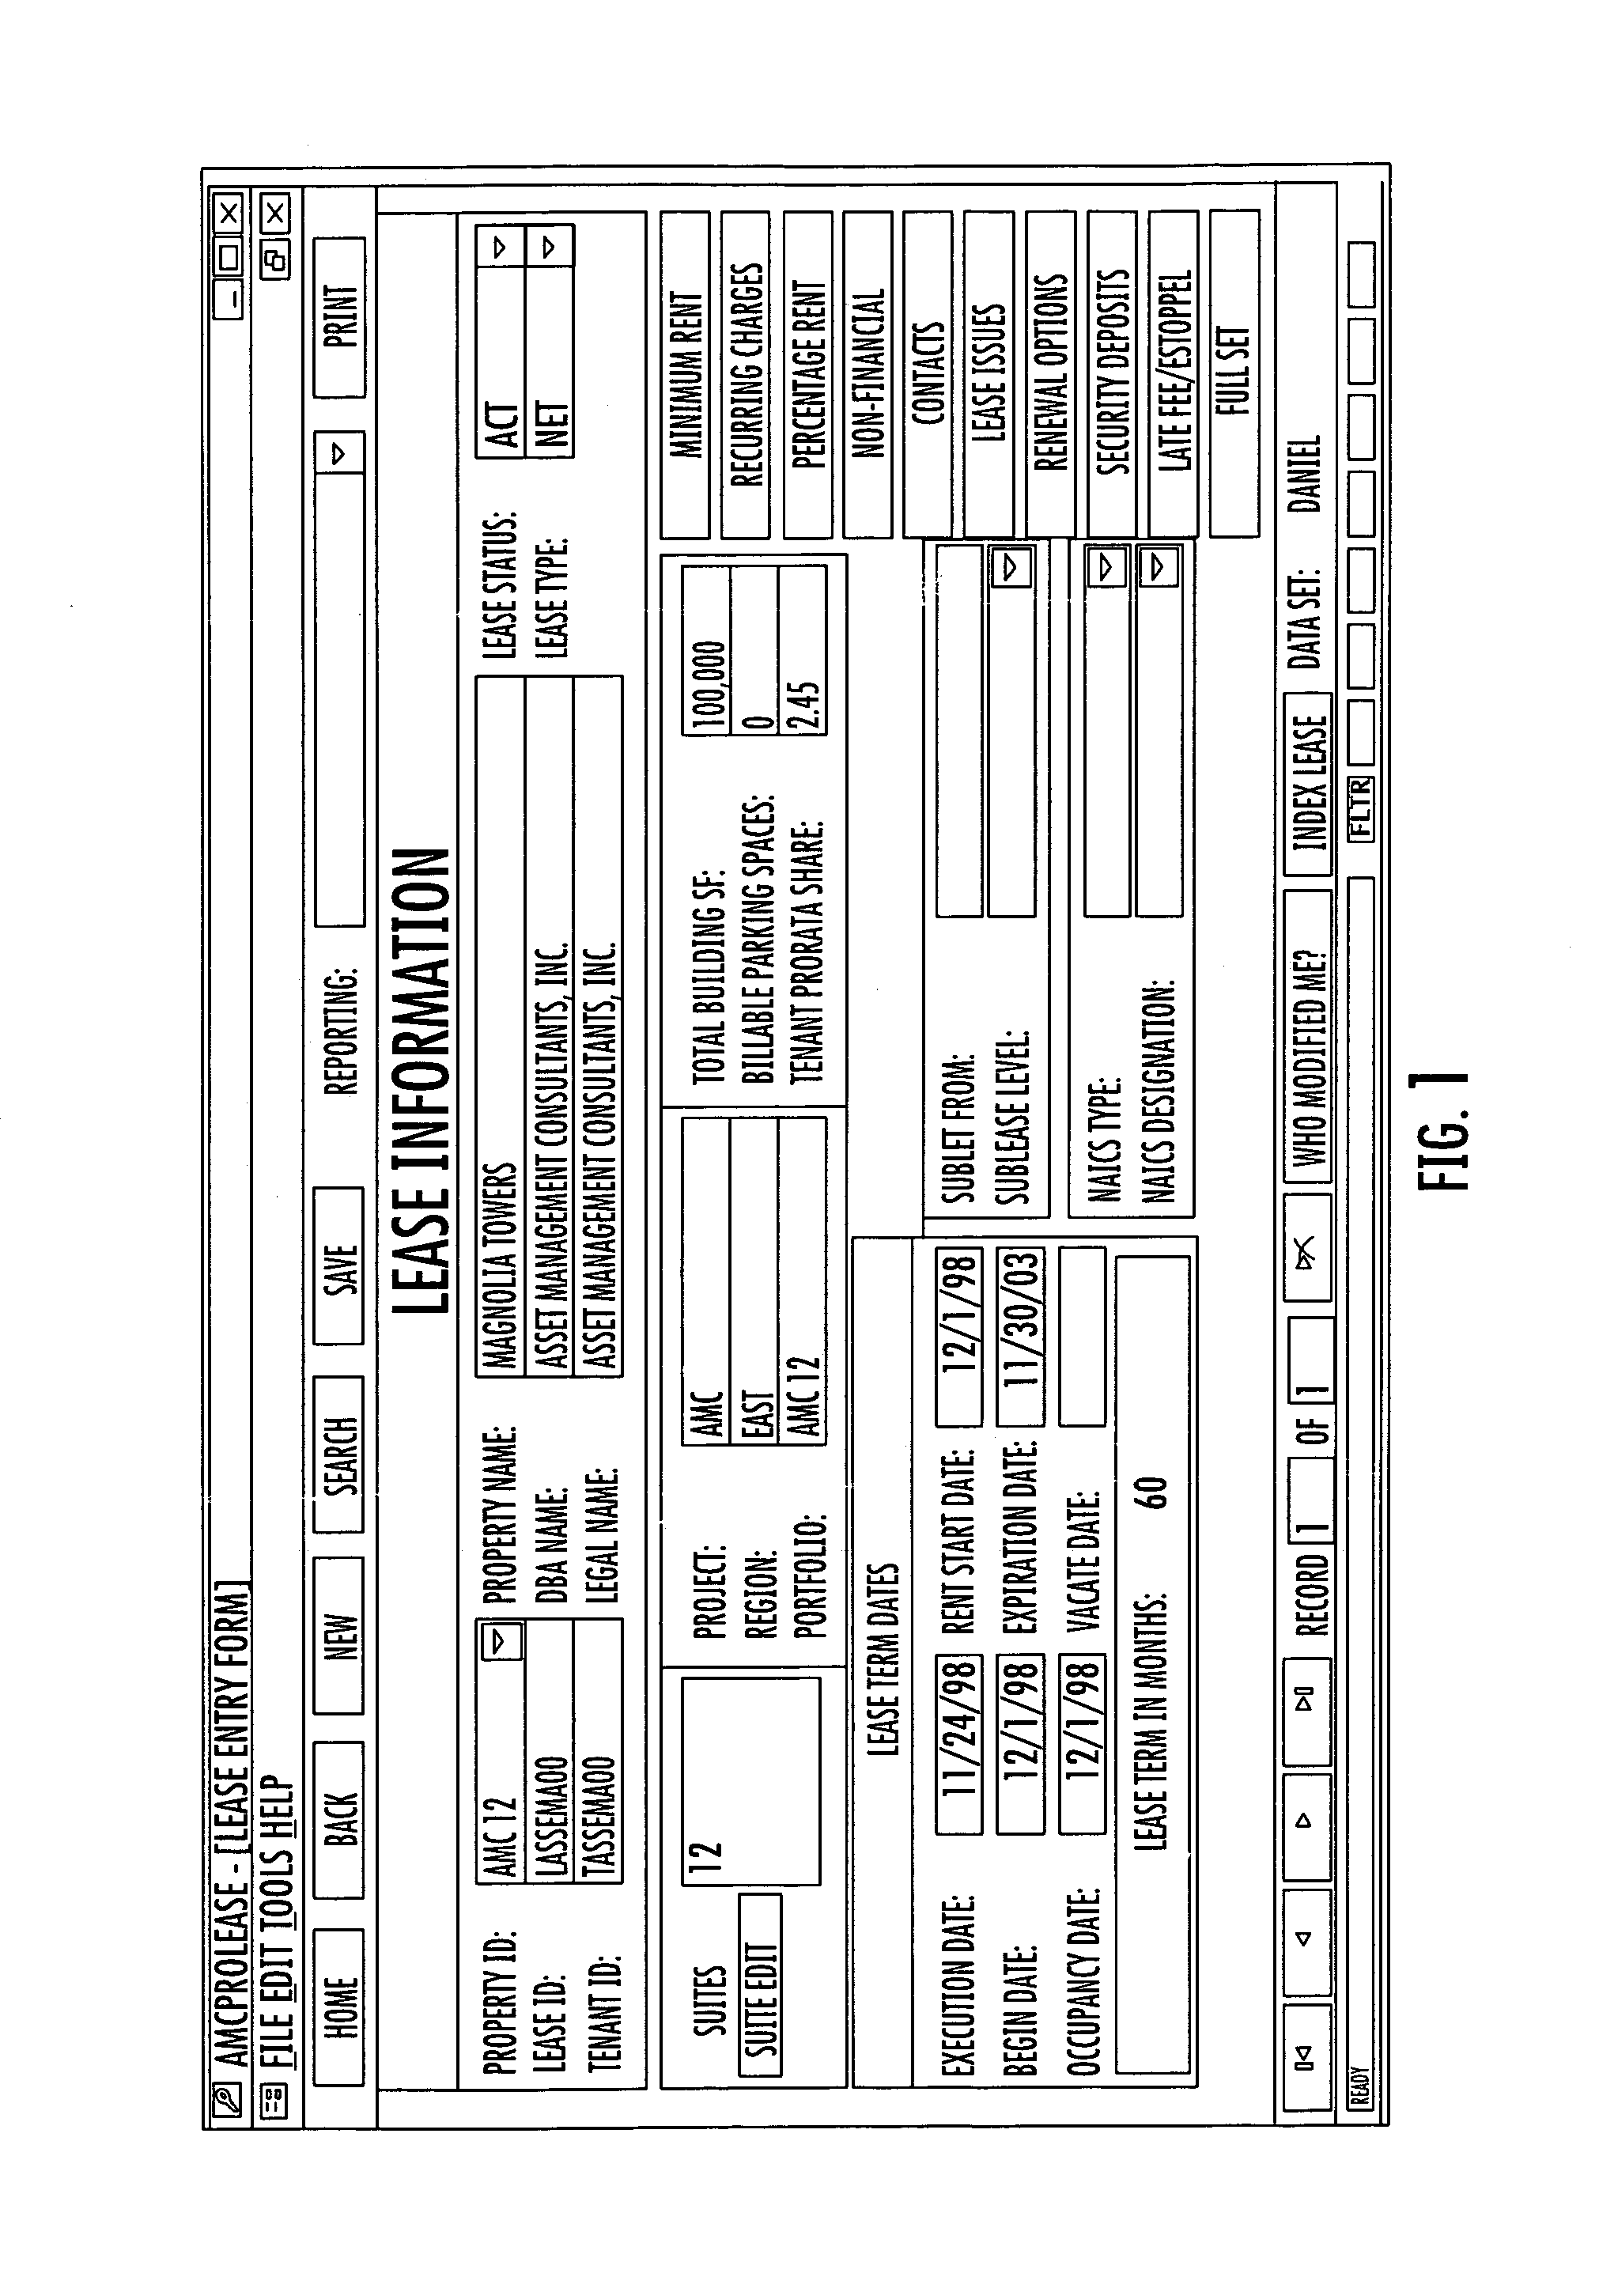 Electronic information management system for abstracting and reporting document information